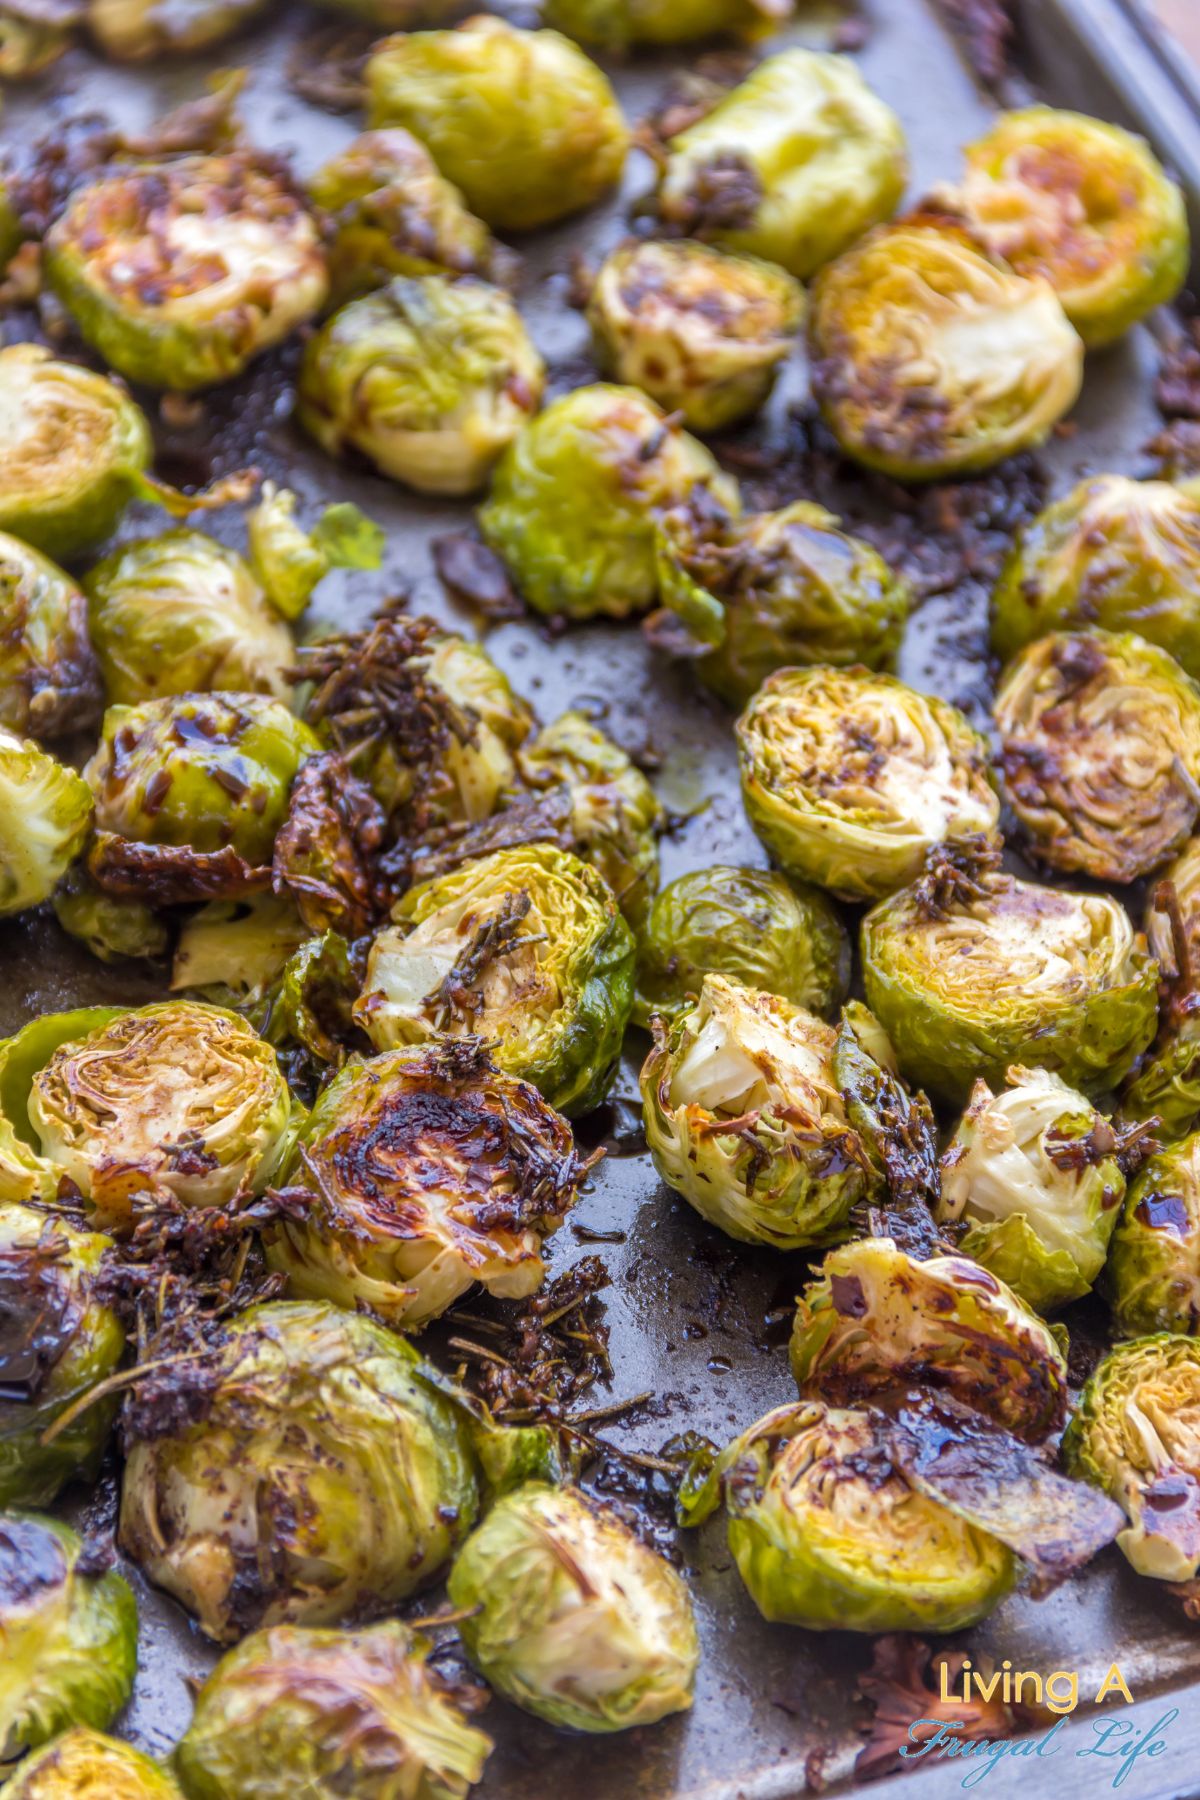 Pan of roasted brussel sprouts